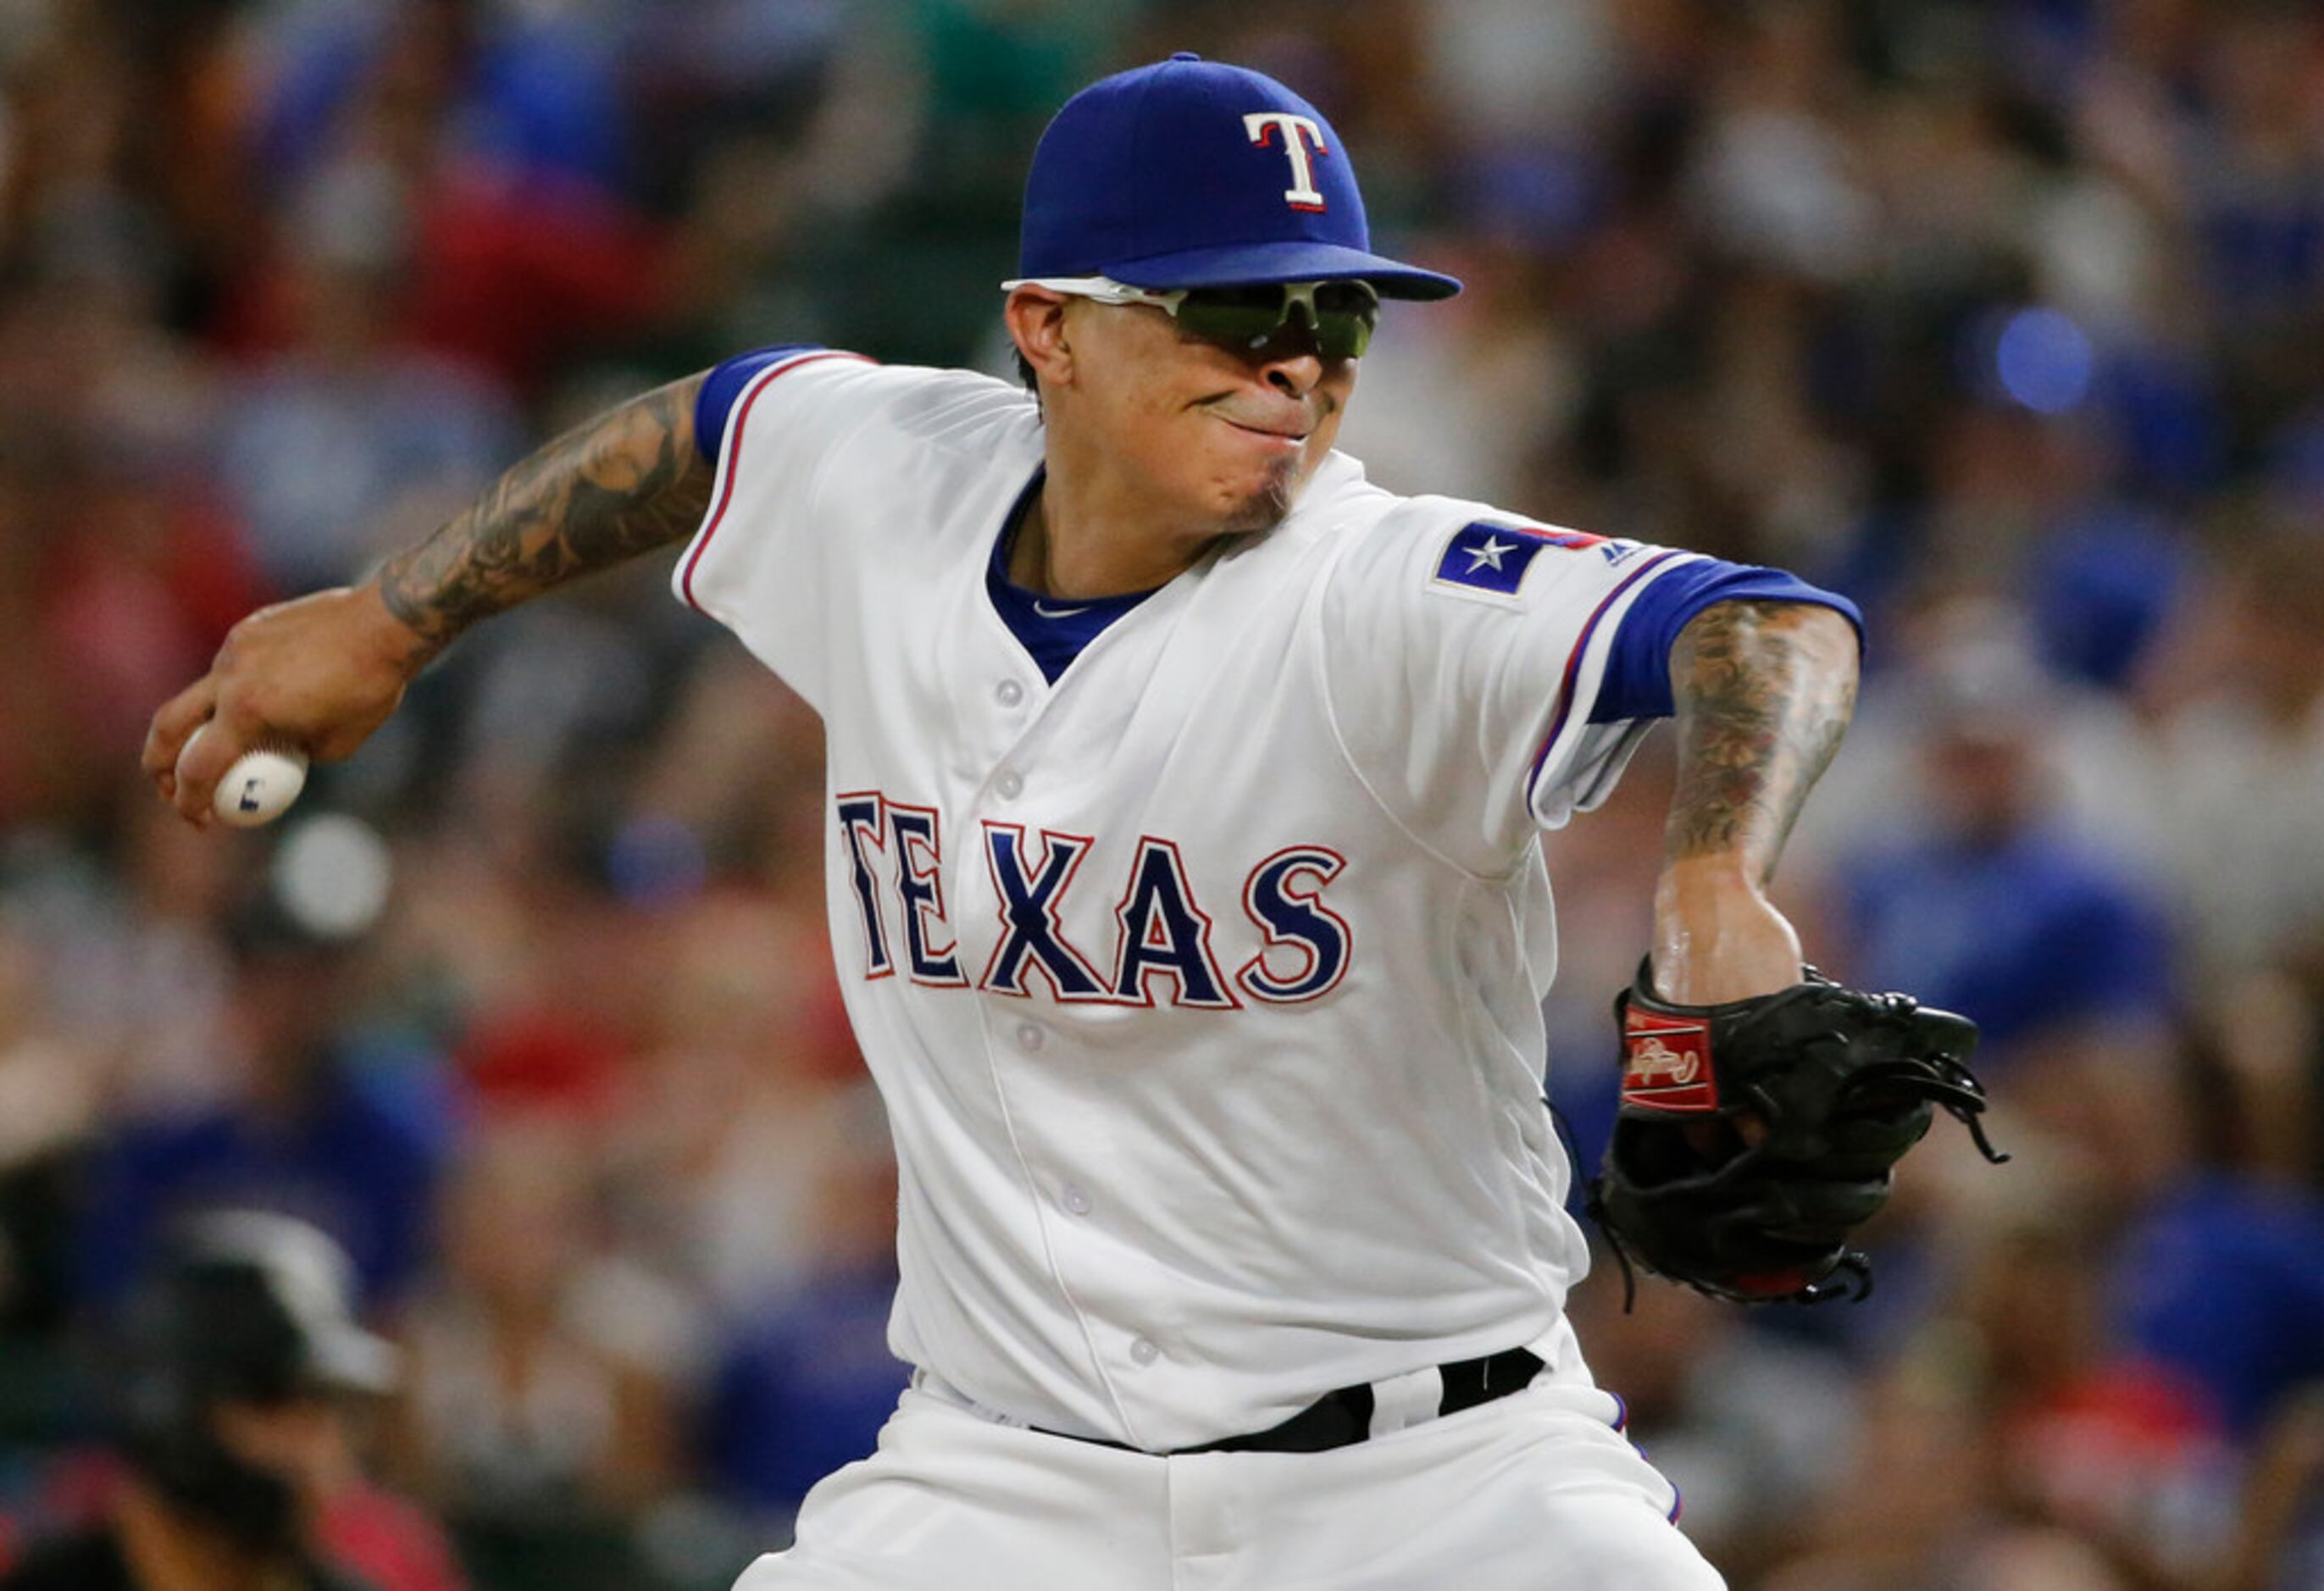 Cubs add reliever Jesse Chavez to roster after trade with Rangers